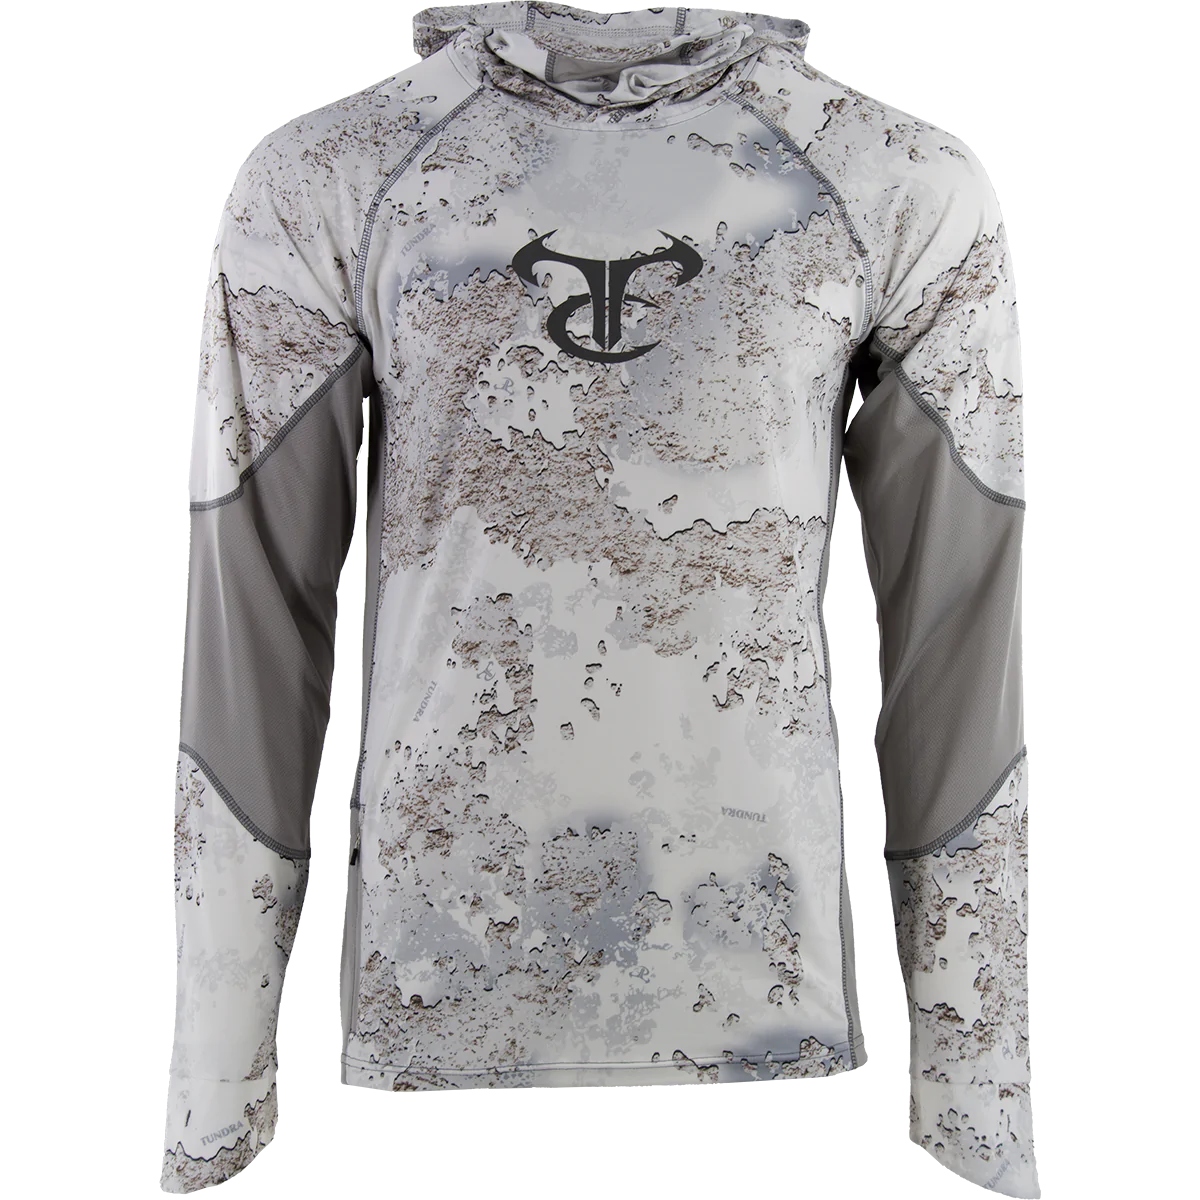 dibs TrueTimber® Announces an Expanded Lineup of High-Performance Fishing Shirts